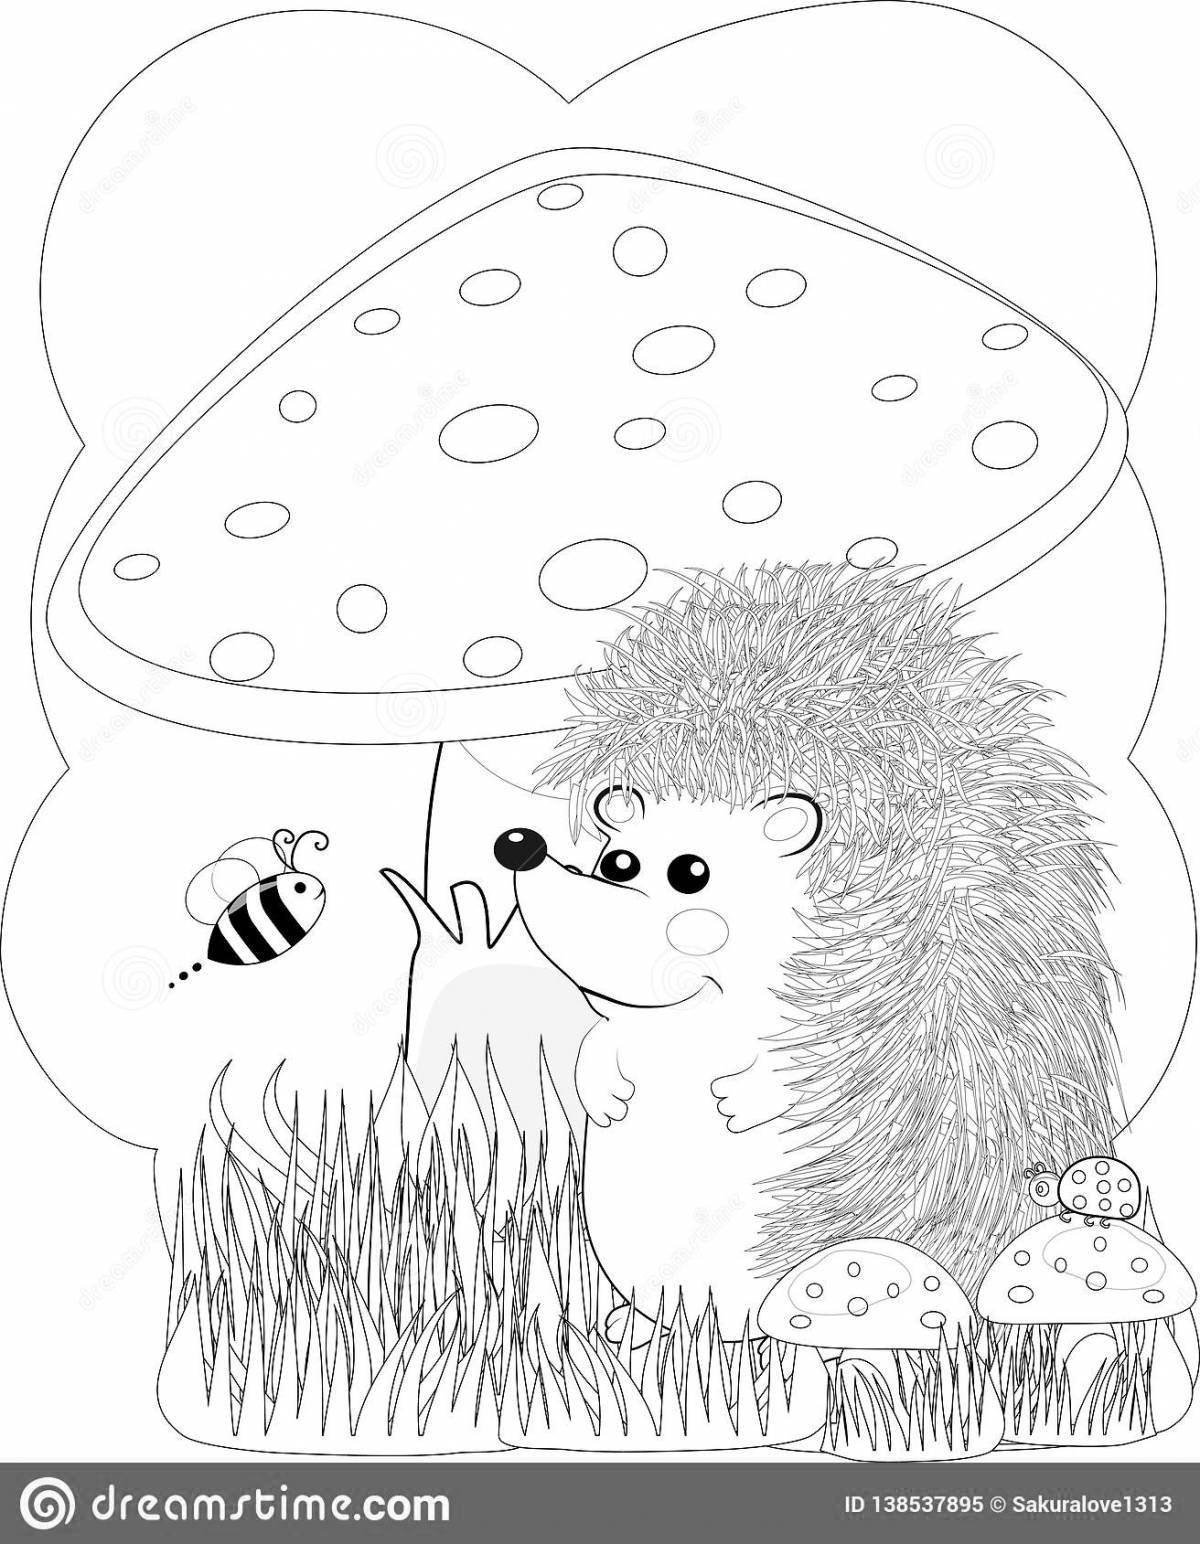 Inviting coloring hedgehog in the fog